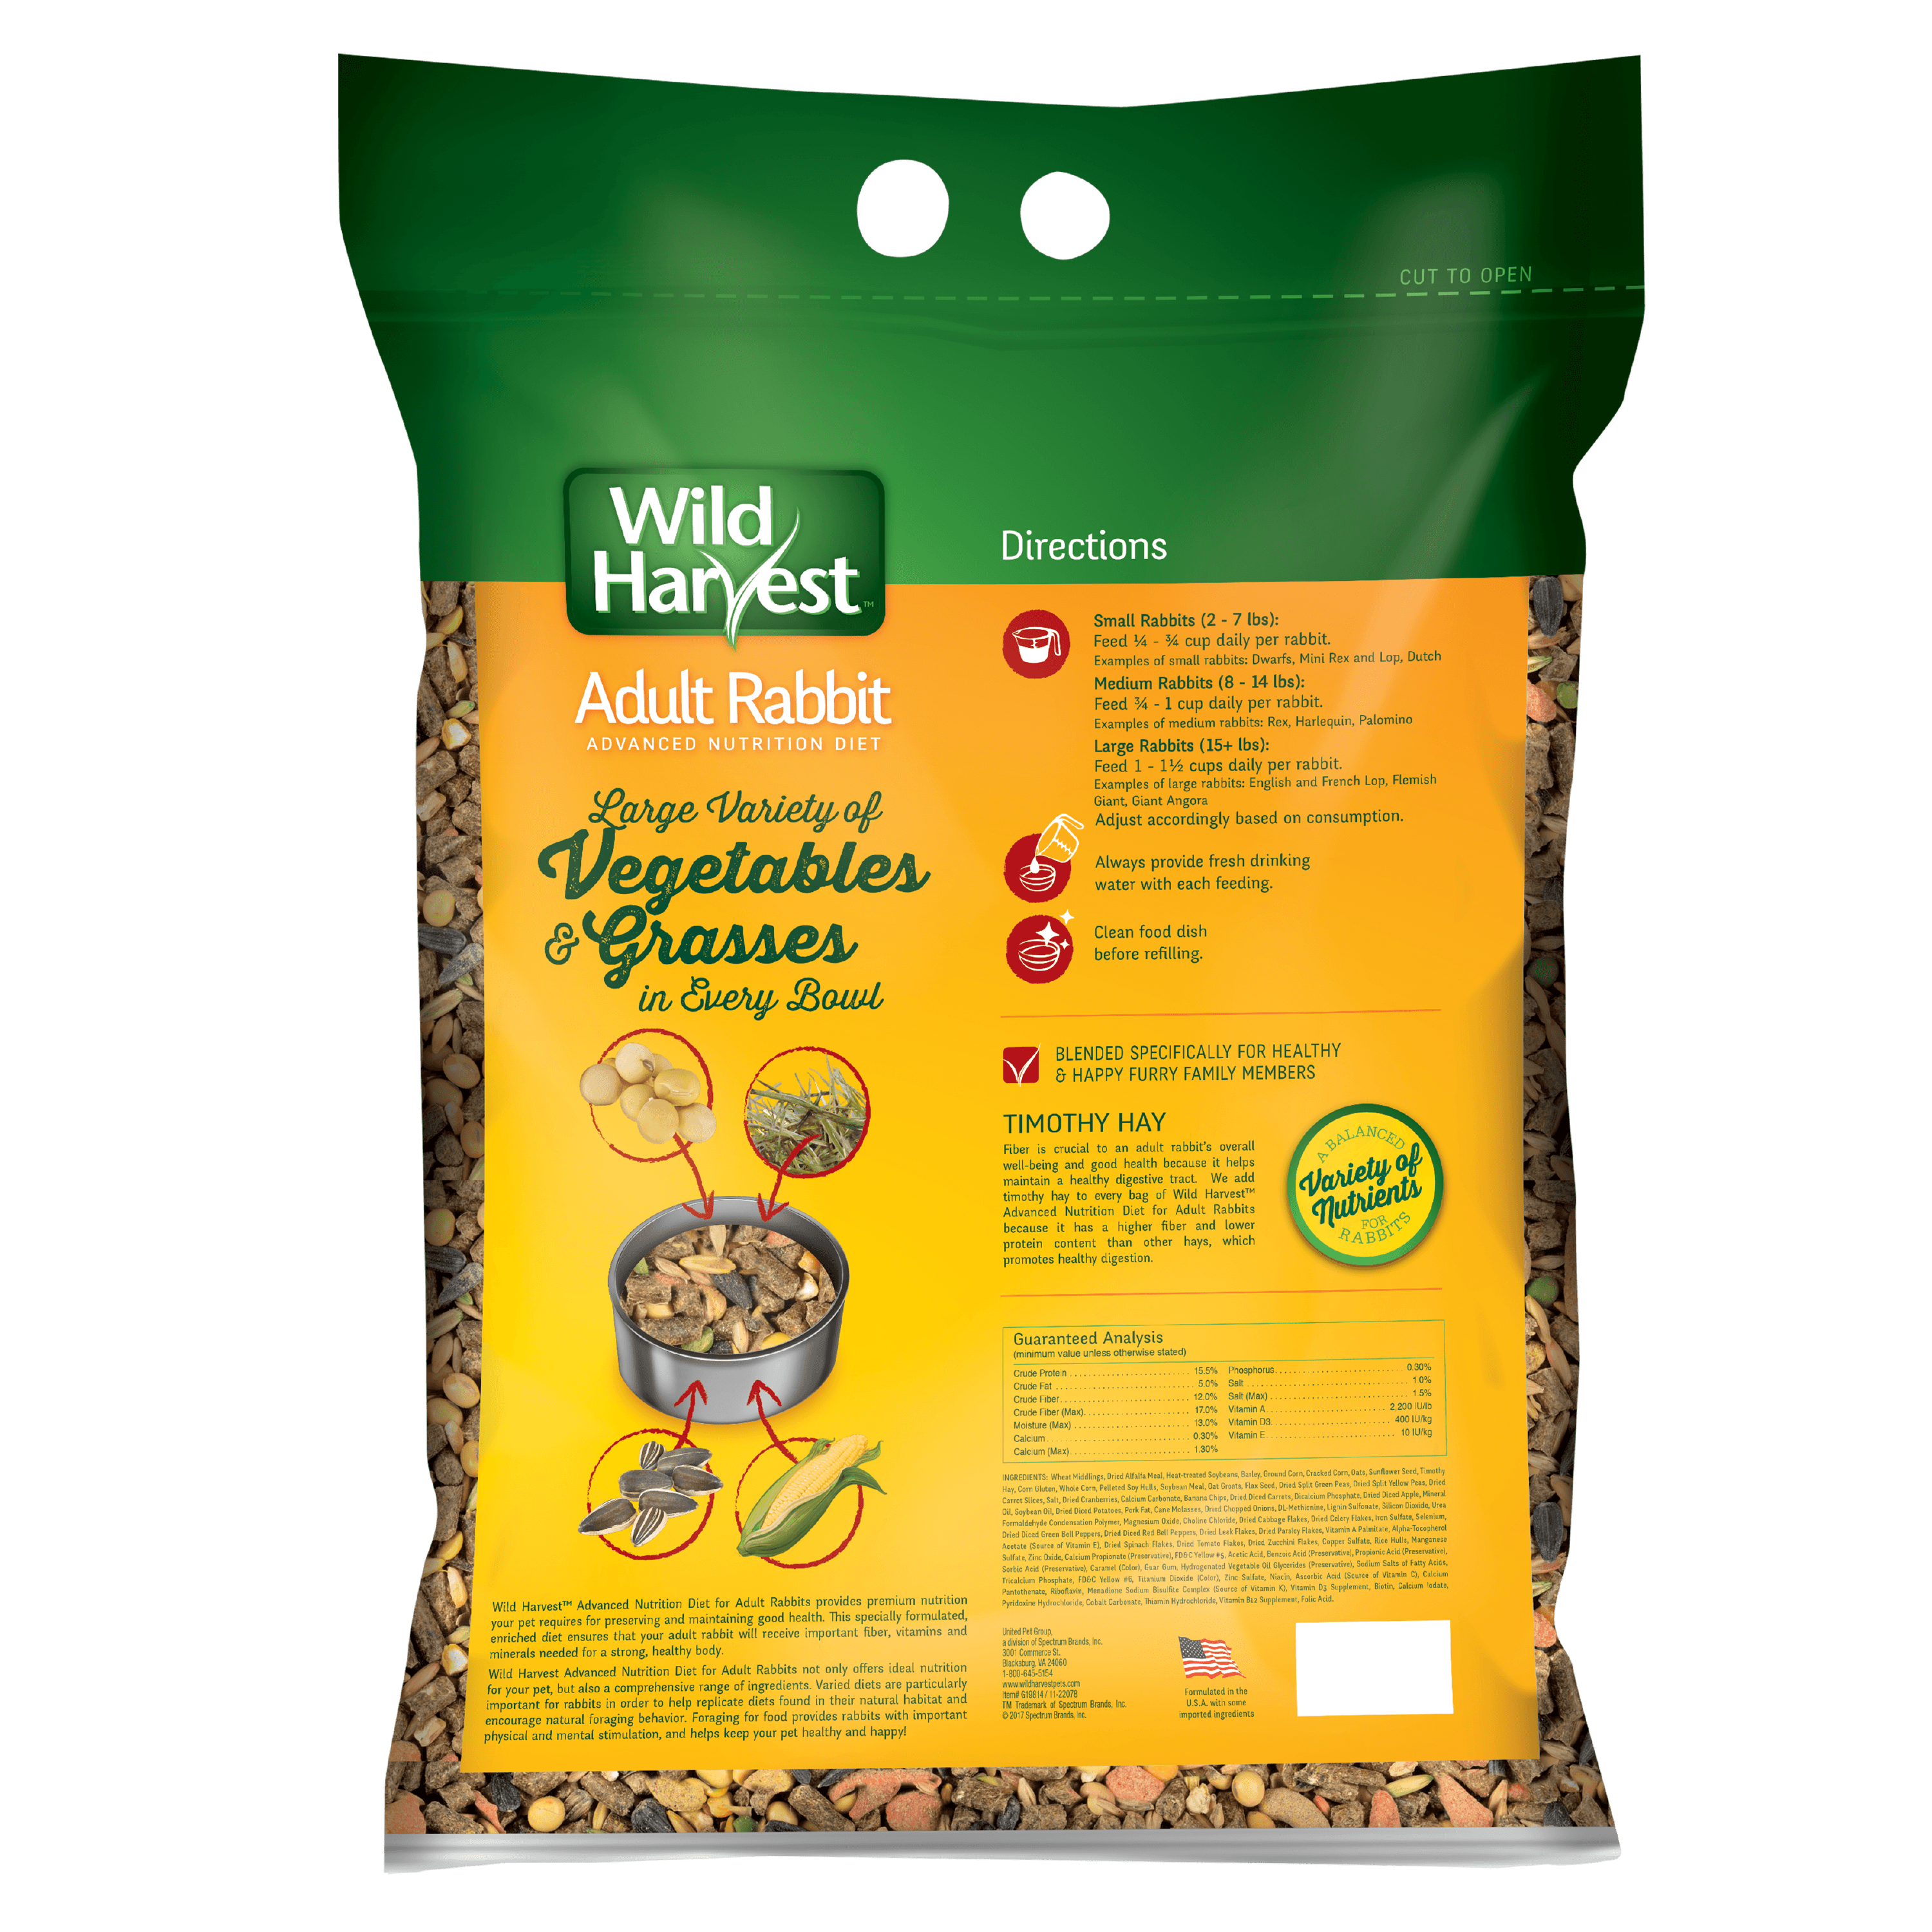 Wild Harvest Advanced Nutrition Adult Rabbit 14 Pounds, Complete and Balanced Diet - image 4 of 7